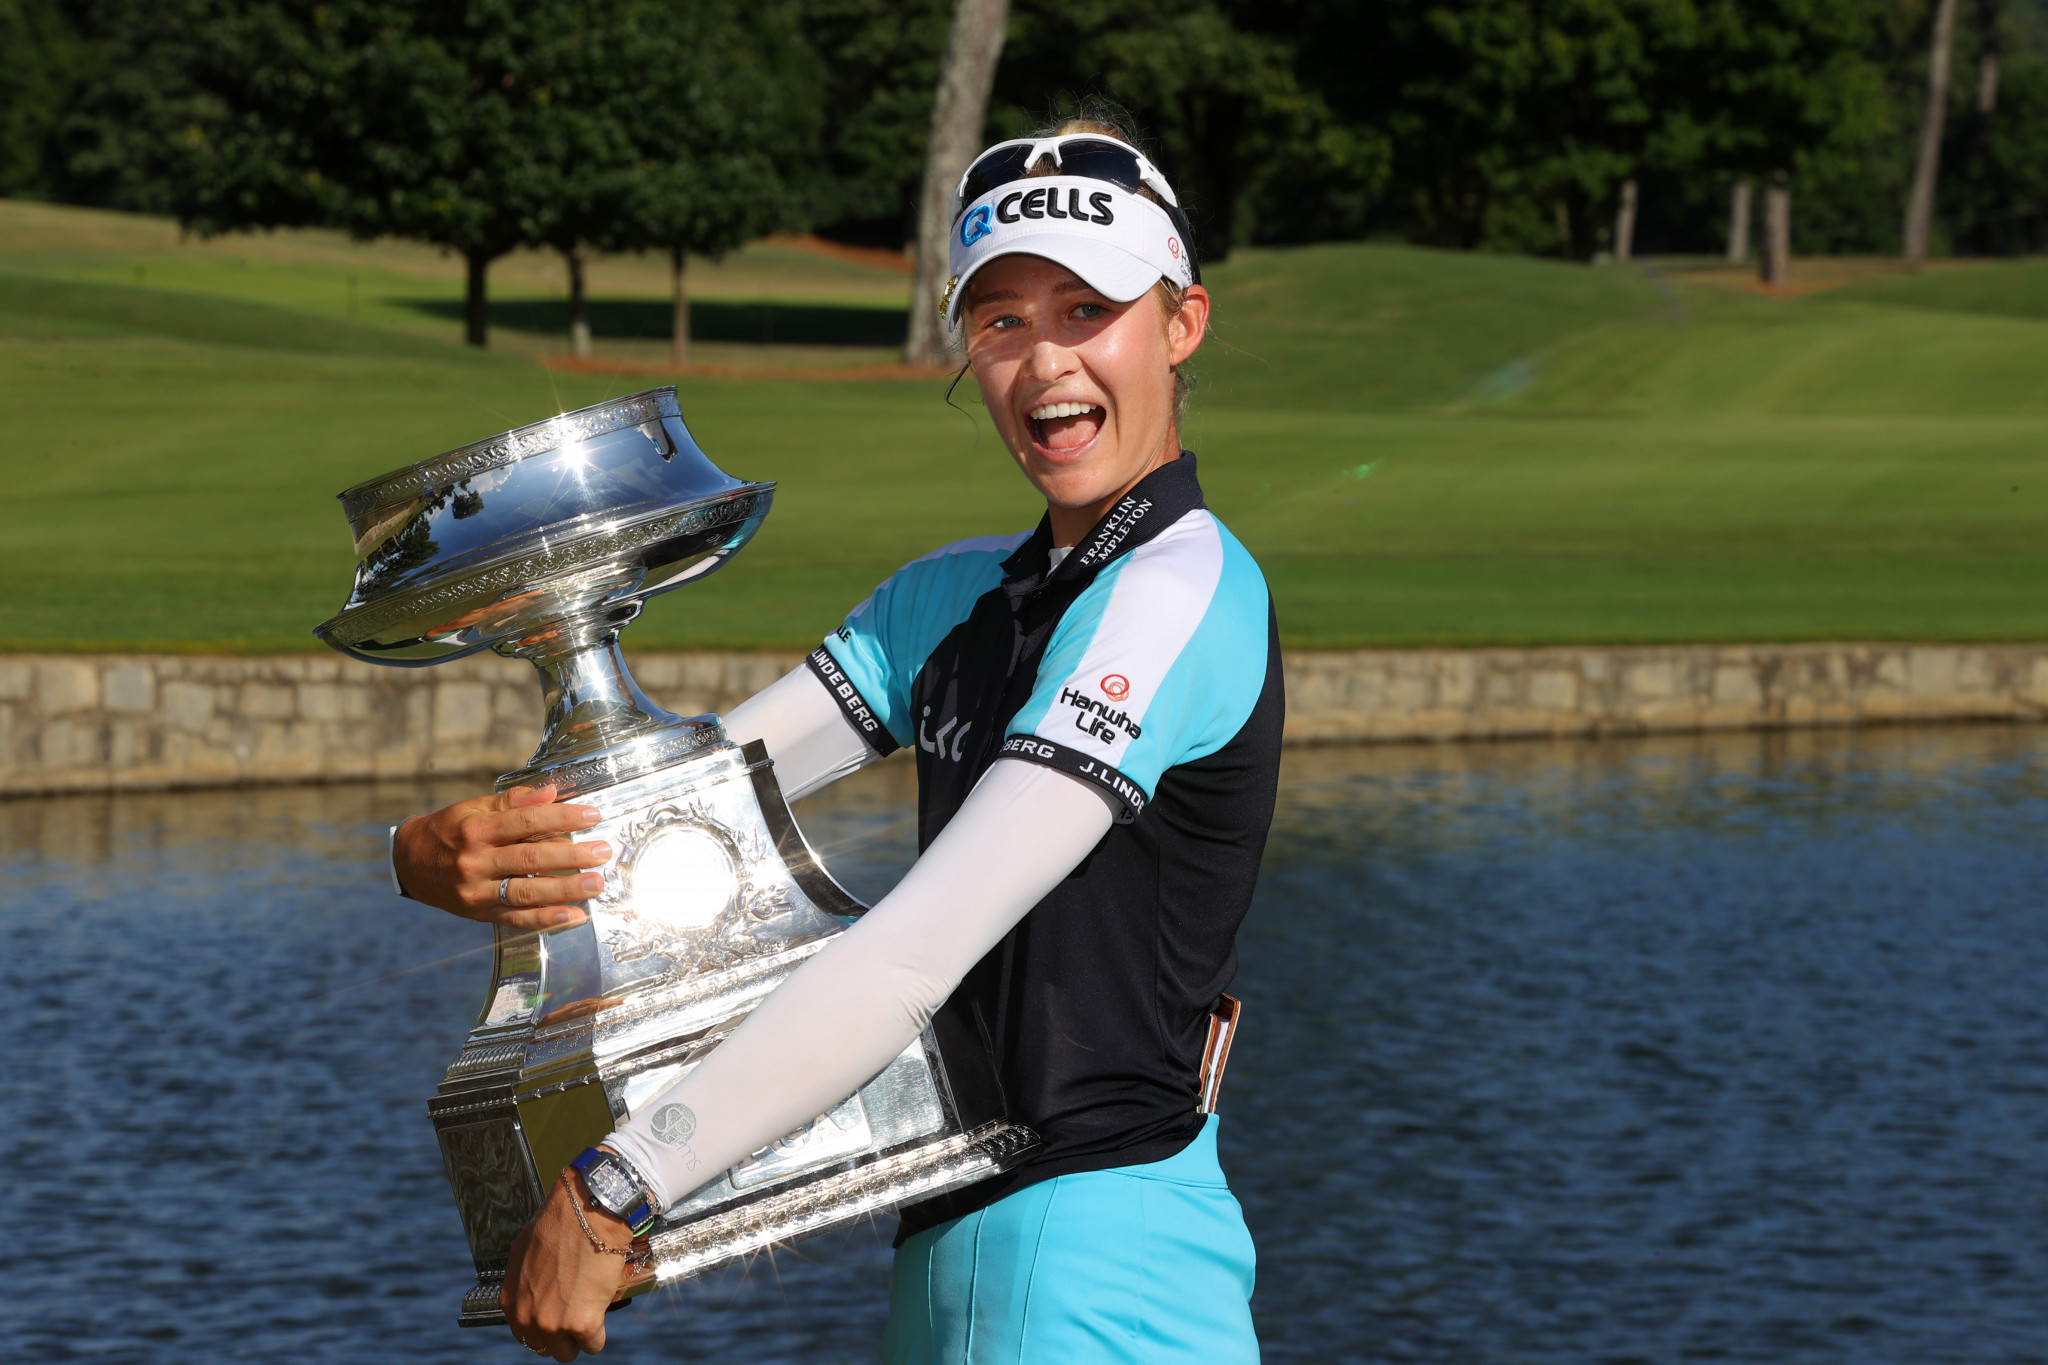 Excitement grows as prize money doubled for women's PGA Championship